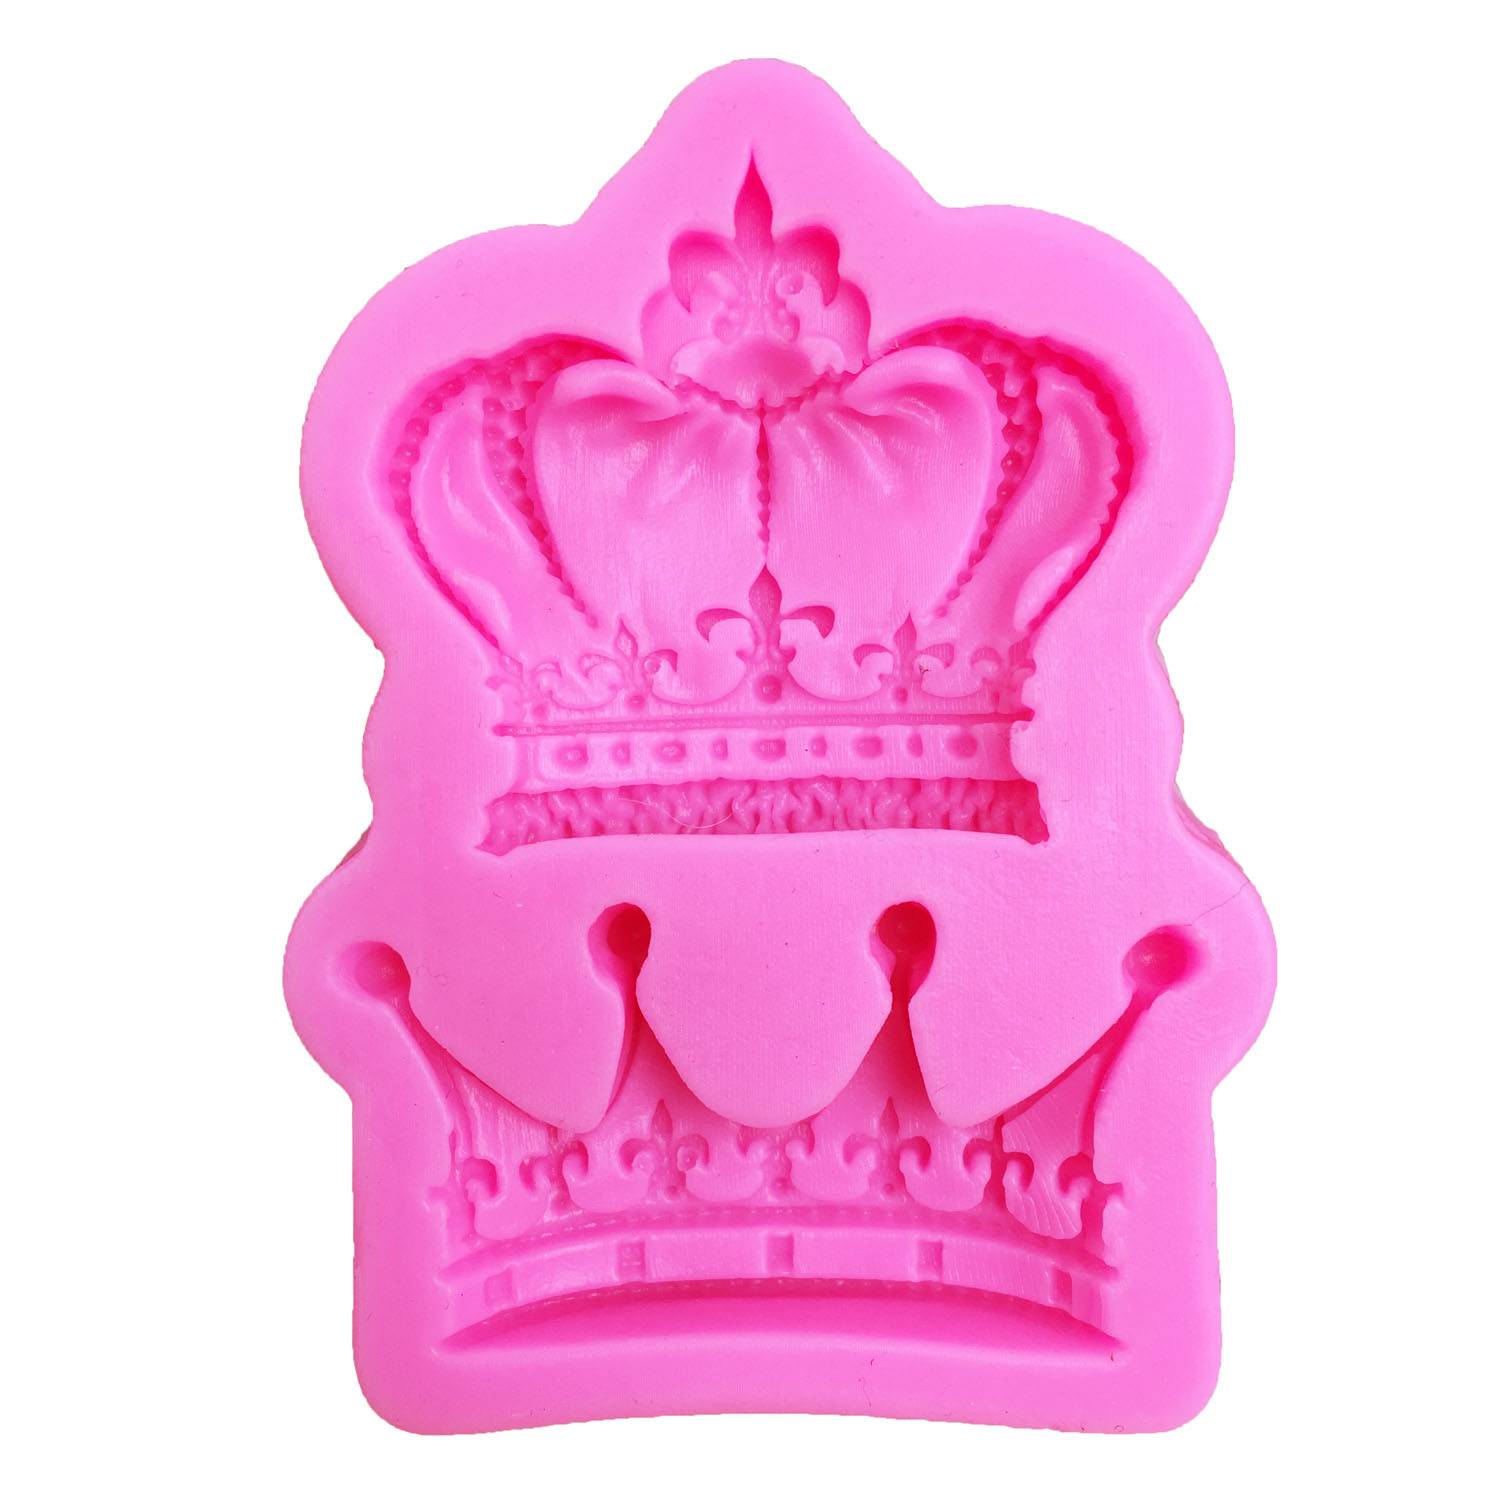 Crown Shaped Silicone Fandont Mold Bakeware Kitchen Accessories